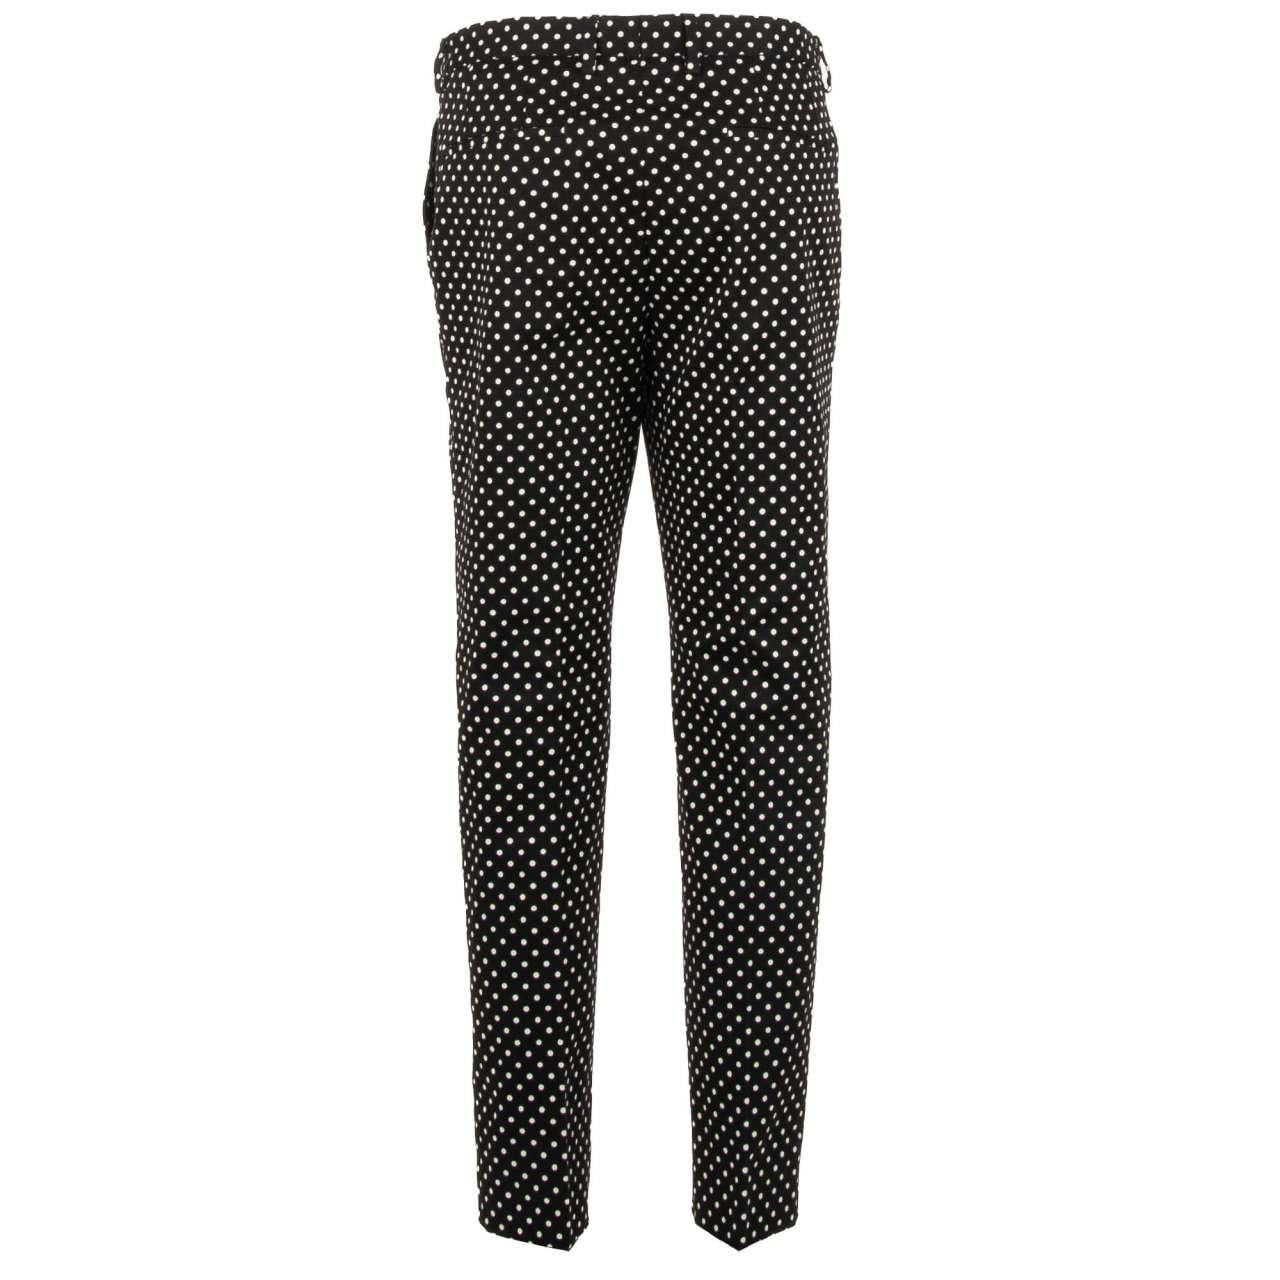 Dolce & Gabbana - Cotton Dress Trousers with Polka Dot Print Black White 50 M-L In Excellent Condition For Sale In Erkrath, DE